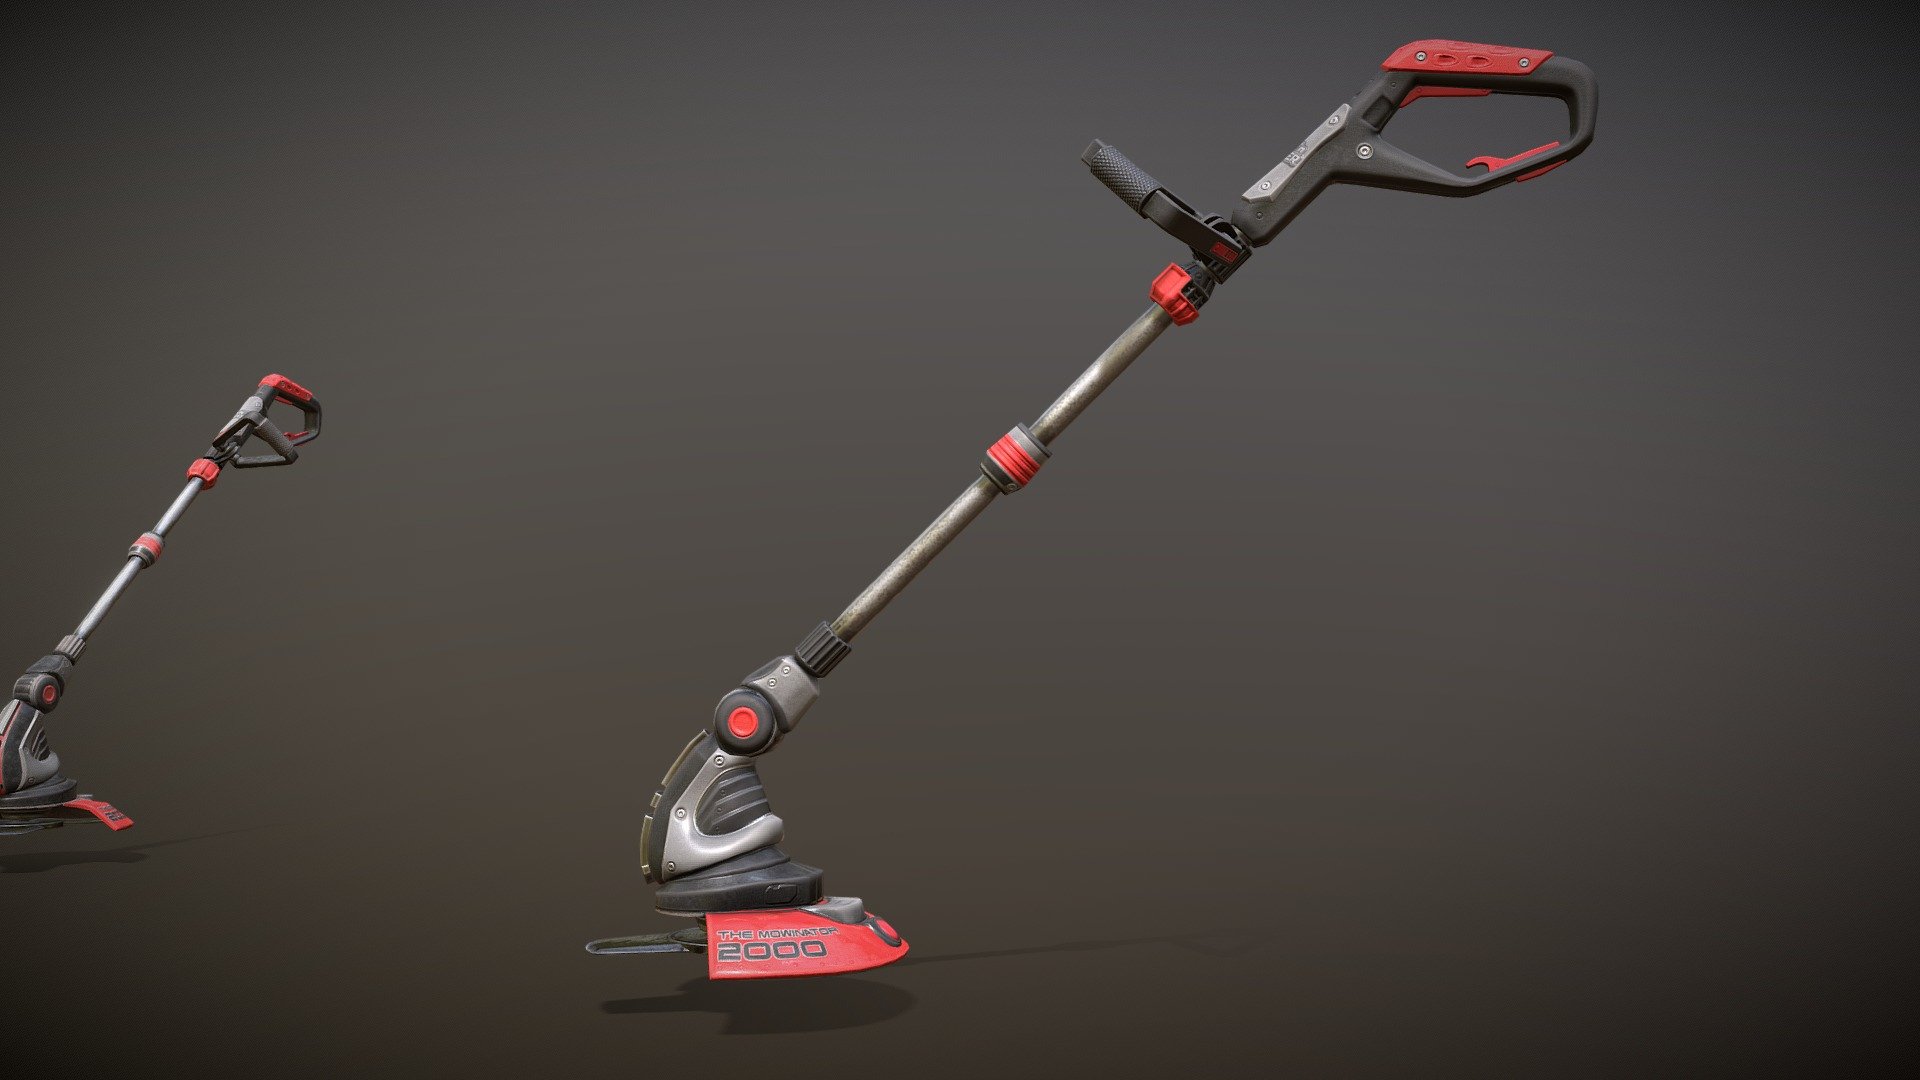 One of the tools used in RollerCoaster Mechanic game by Forestlight studio.

The Mowinator 2000 is a multipurpose heavy duty lawn mower/bush trimmer capable of mowing down green and twigs and occasionally zombies ;) A model with an example operation animation and four sets of textures (clean and dirt dependent on surroundings). 

You can see games steam page here: https://store.steampowered.com/app/1280660/Rollercoaster_Mechanic/ If you want to track game development add Rollercoaster Mechanic to a wishlist on its steam page.

Other game trailers and annoucments from the publisher on: https://www.youtube.com/channel/UCNfDkzrtQGI6sYTEgs-frMw

You can find me on: https://www.artstation.com/ravgfx - The Mowinator 2000 - 3D model by RavGFX 3d model